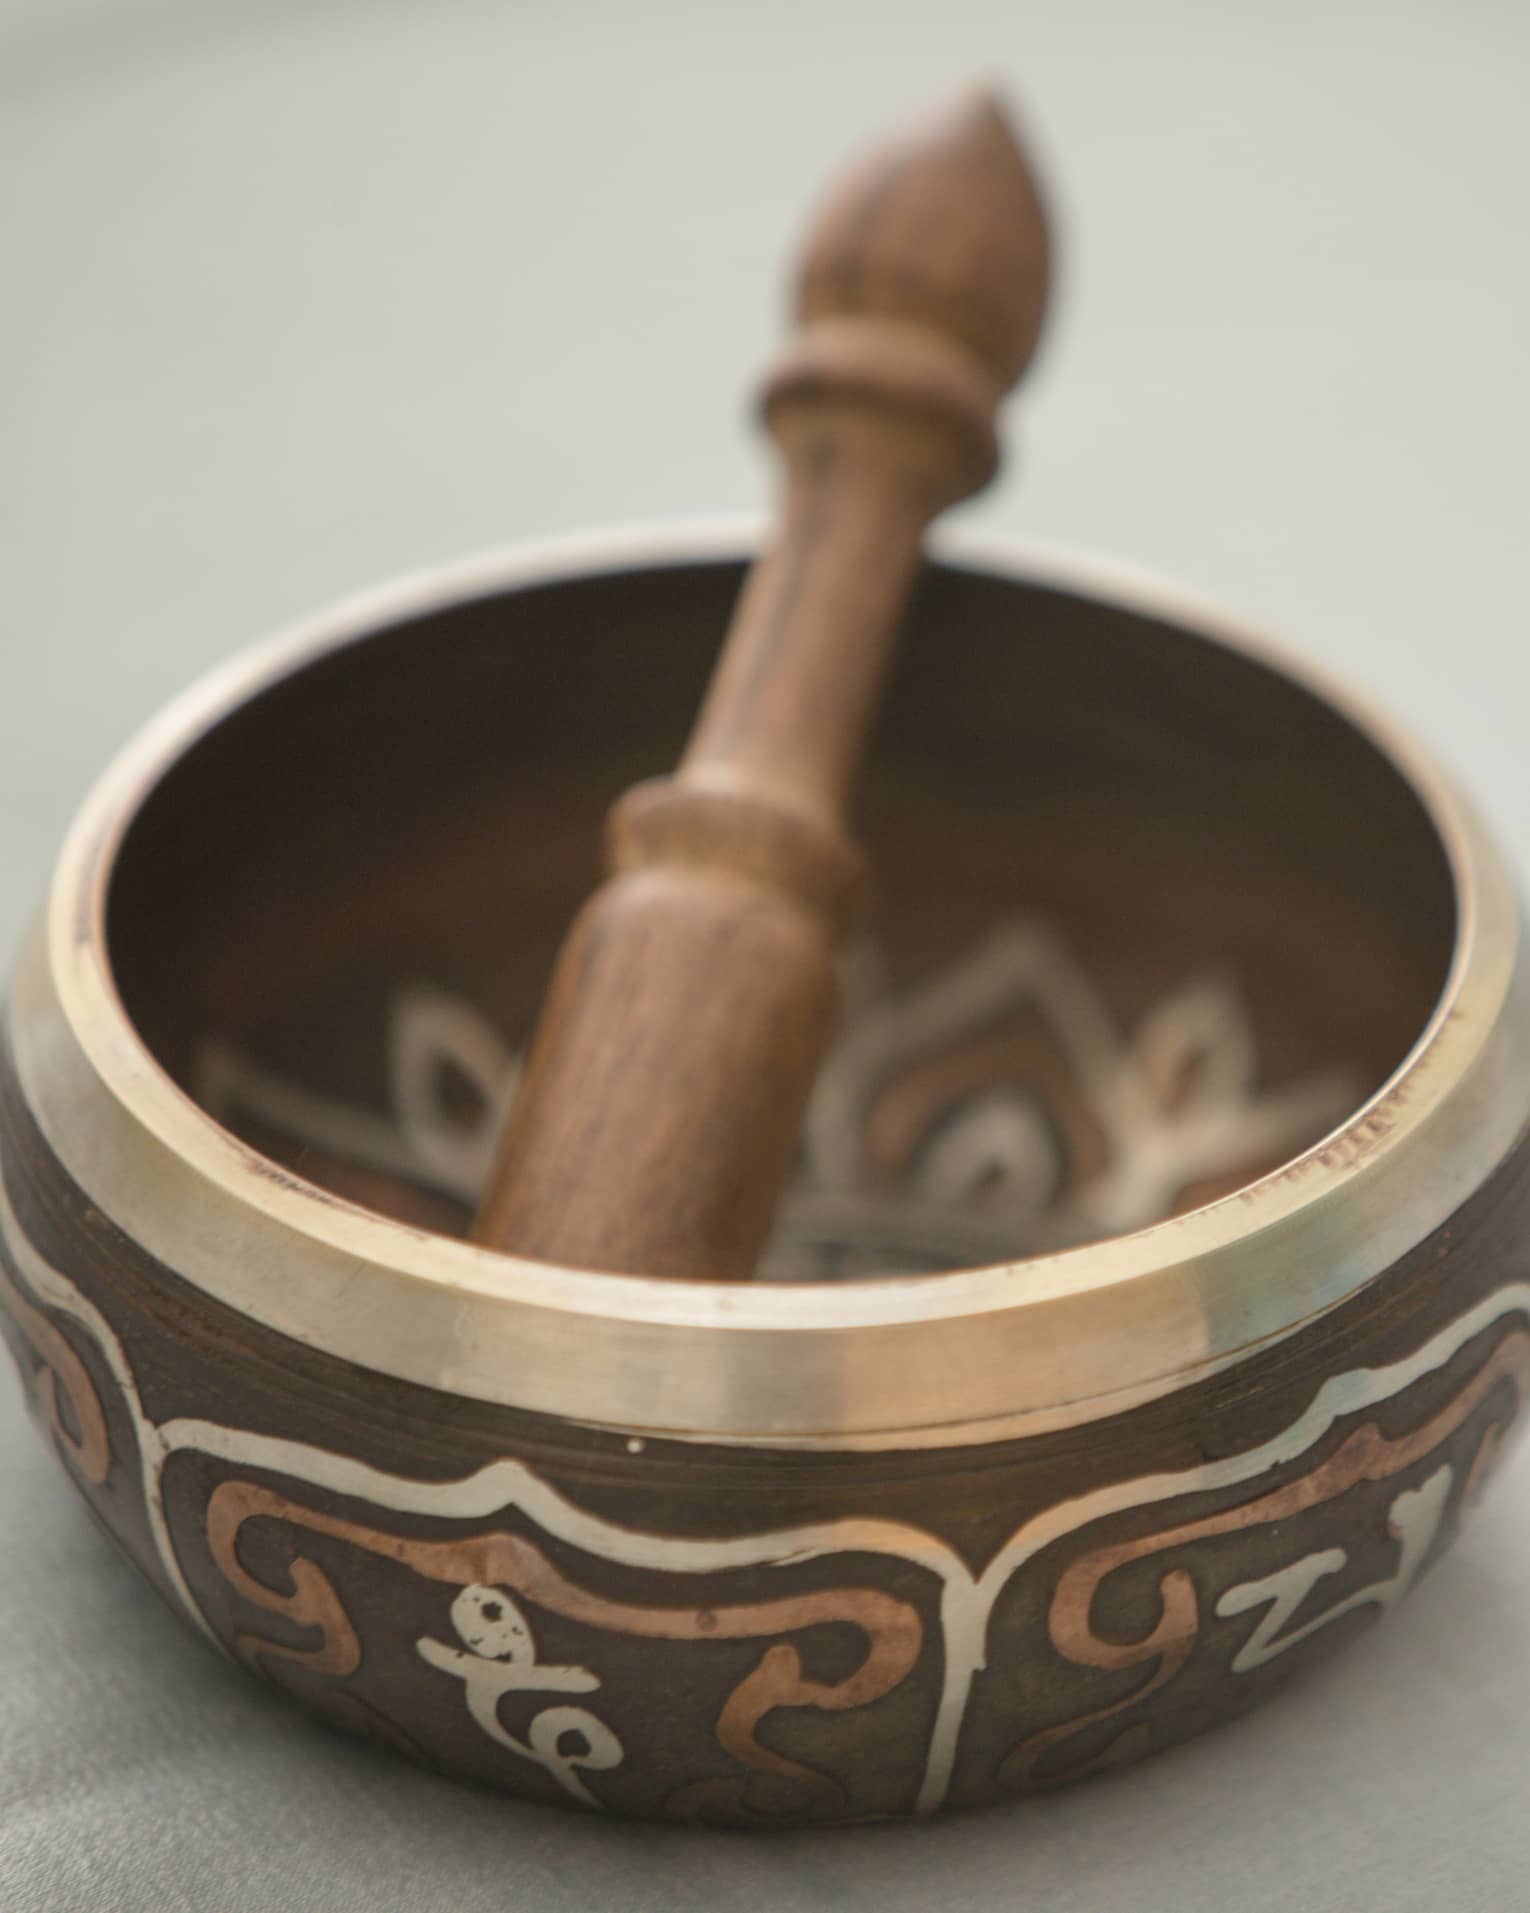 Small copper and wood bowl with decorative design, wood pestle